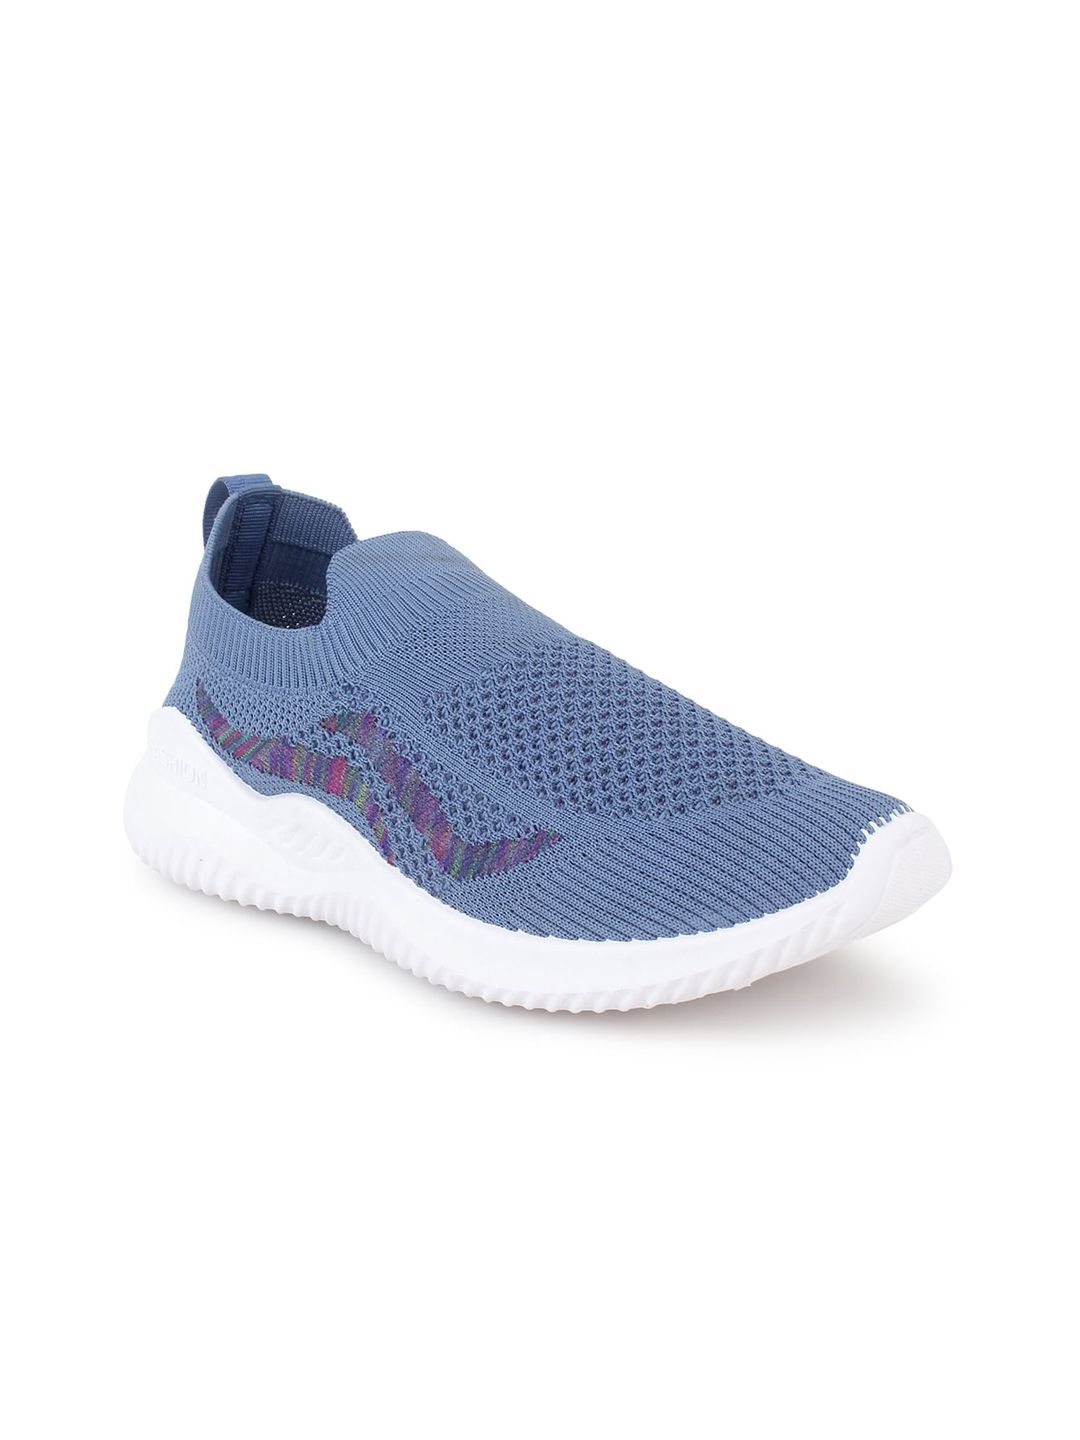 Champs Women Blue Woven Design Lightweight Slip-On Sneakers Price in India